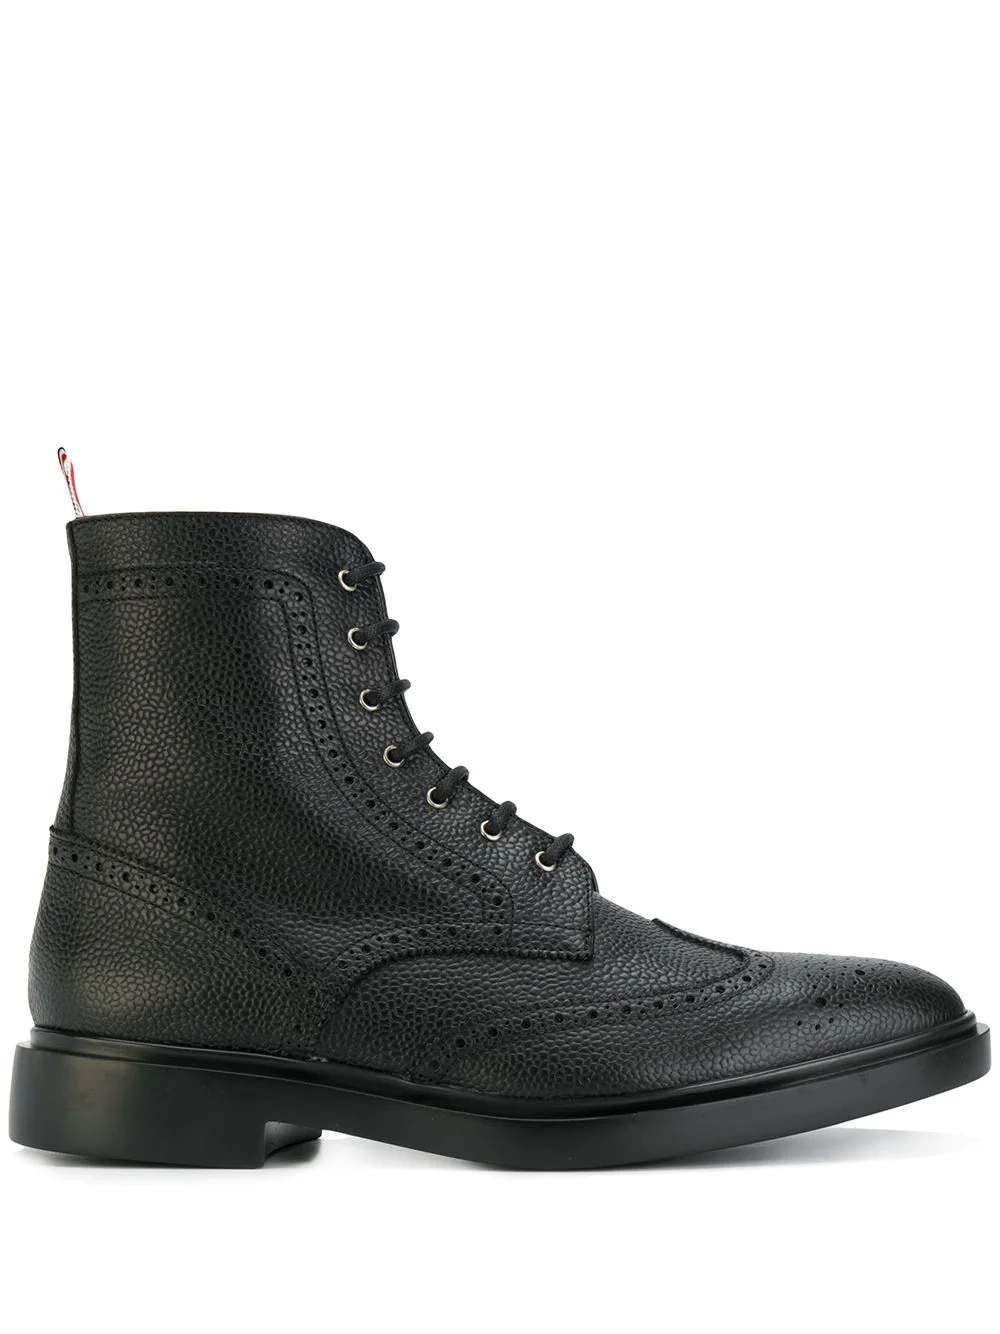 Classic Wingtip Boot W/ Lightweight Rubber Sole In Pebble Grain Leather Black